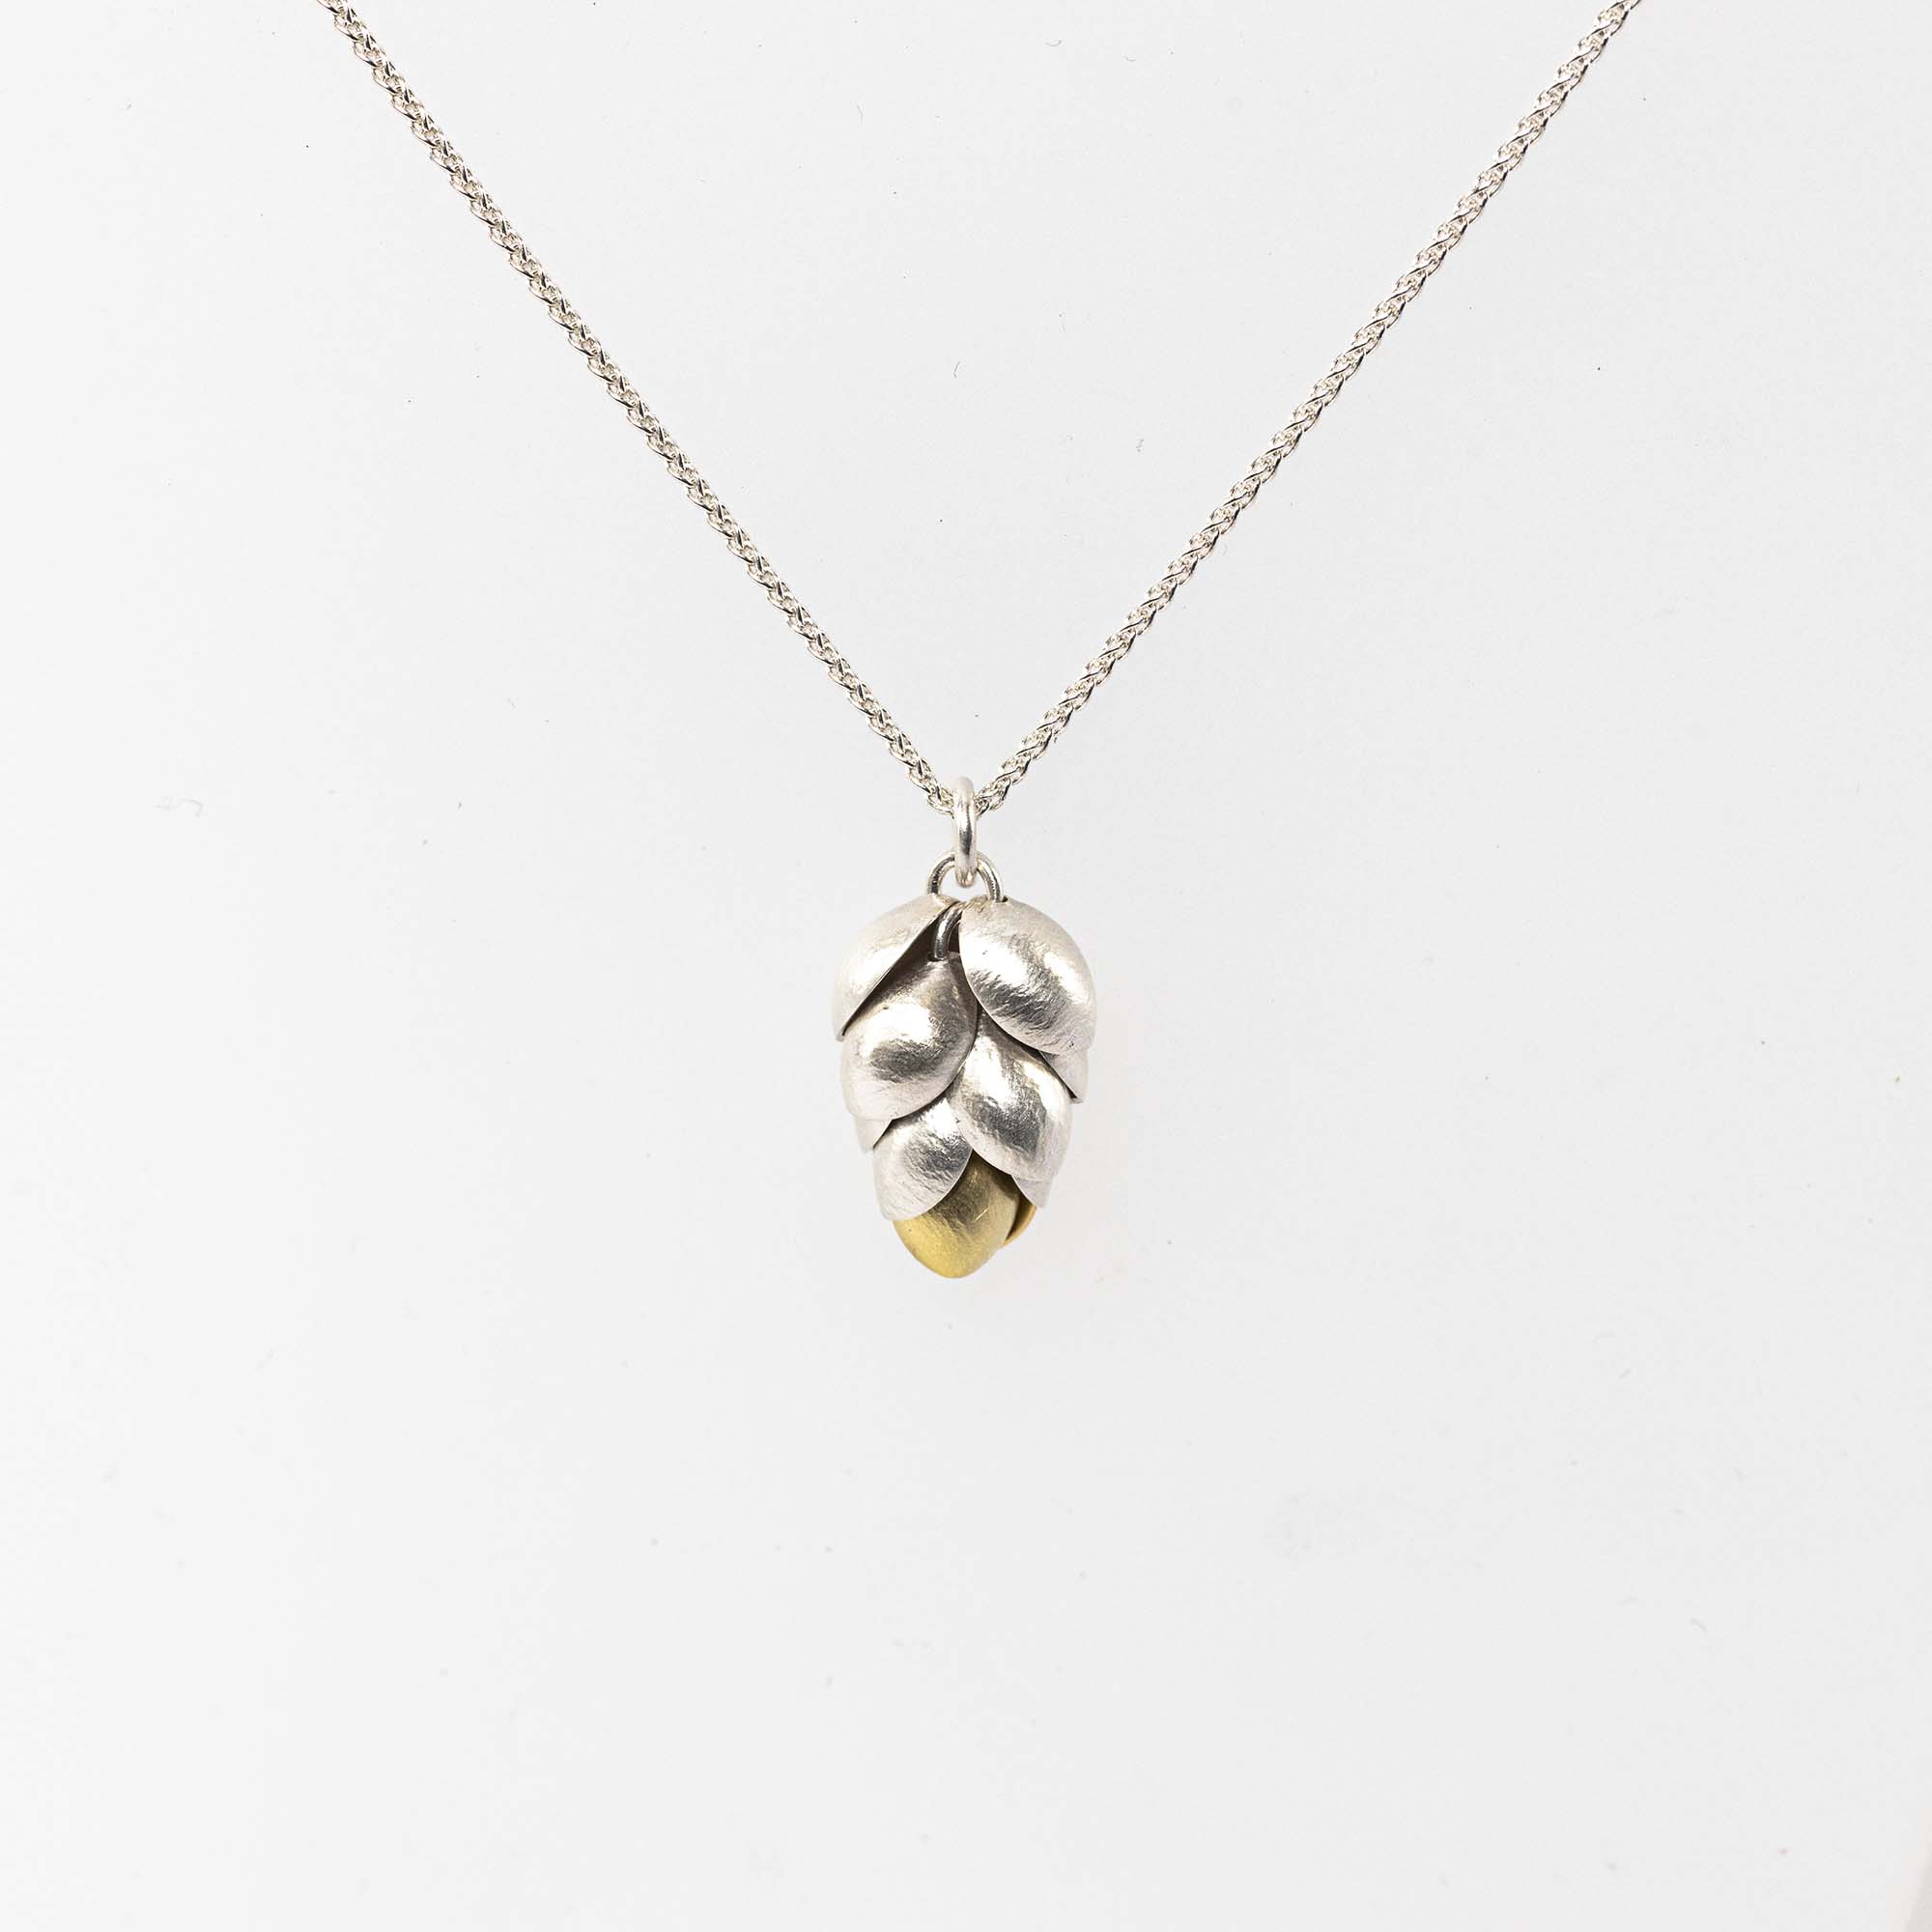 Glenn Campbell QGS5-M Small Silver GrassPod pendant with 5 layers and 18ct Gold feature £248